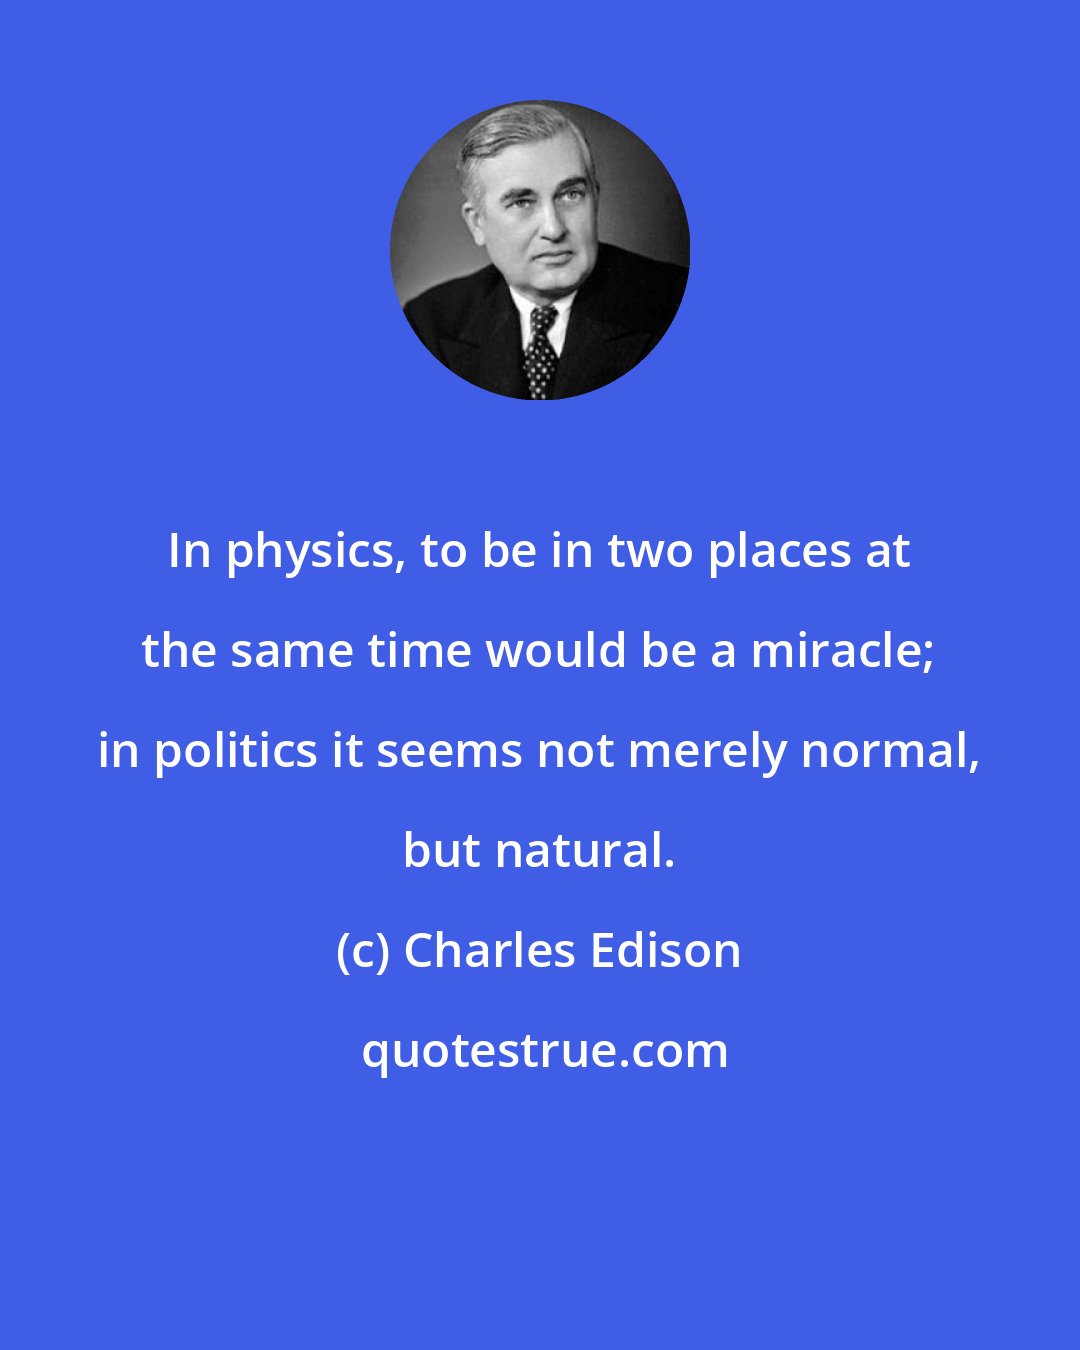 Charles Edison: In physics, to be in two places at the same time would be a miracle; in politics it seems not merely normal, but natural.